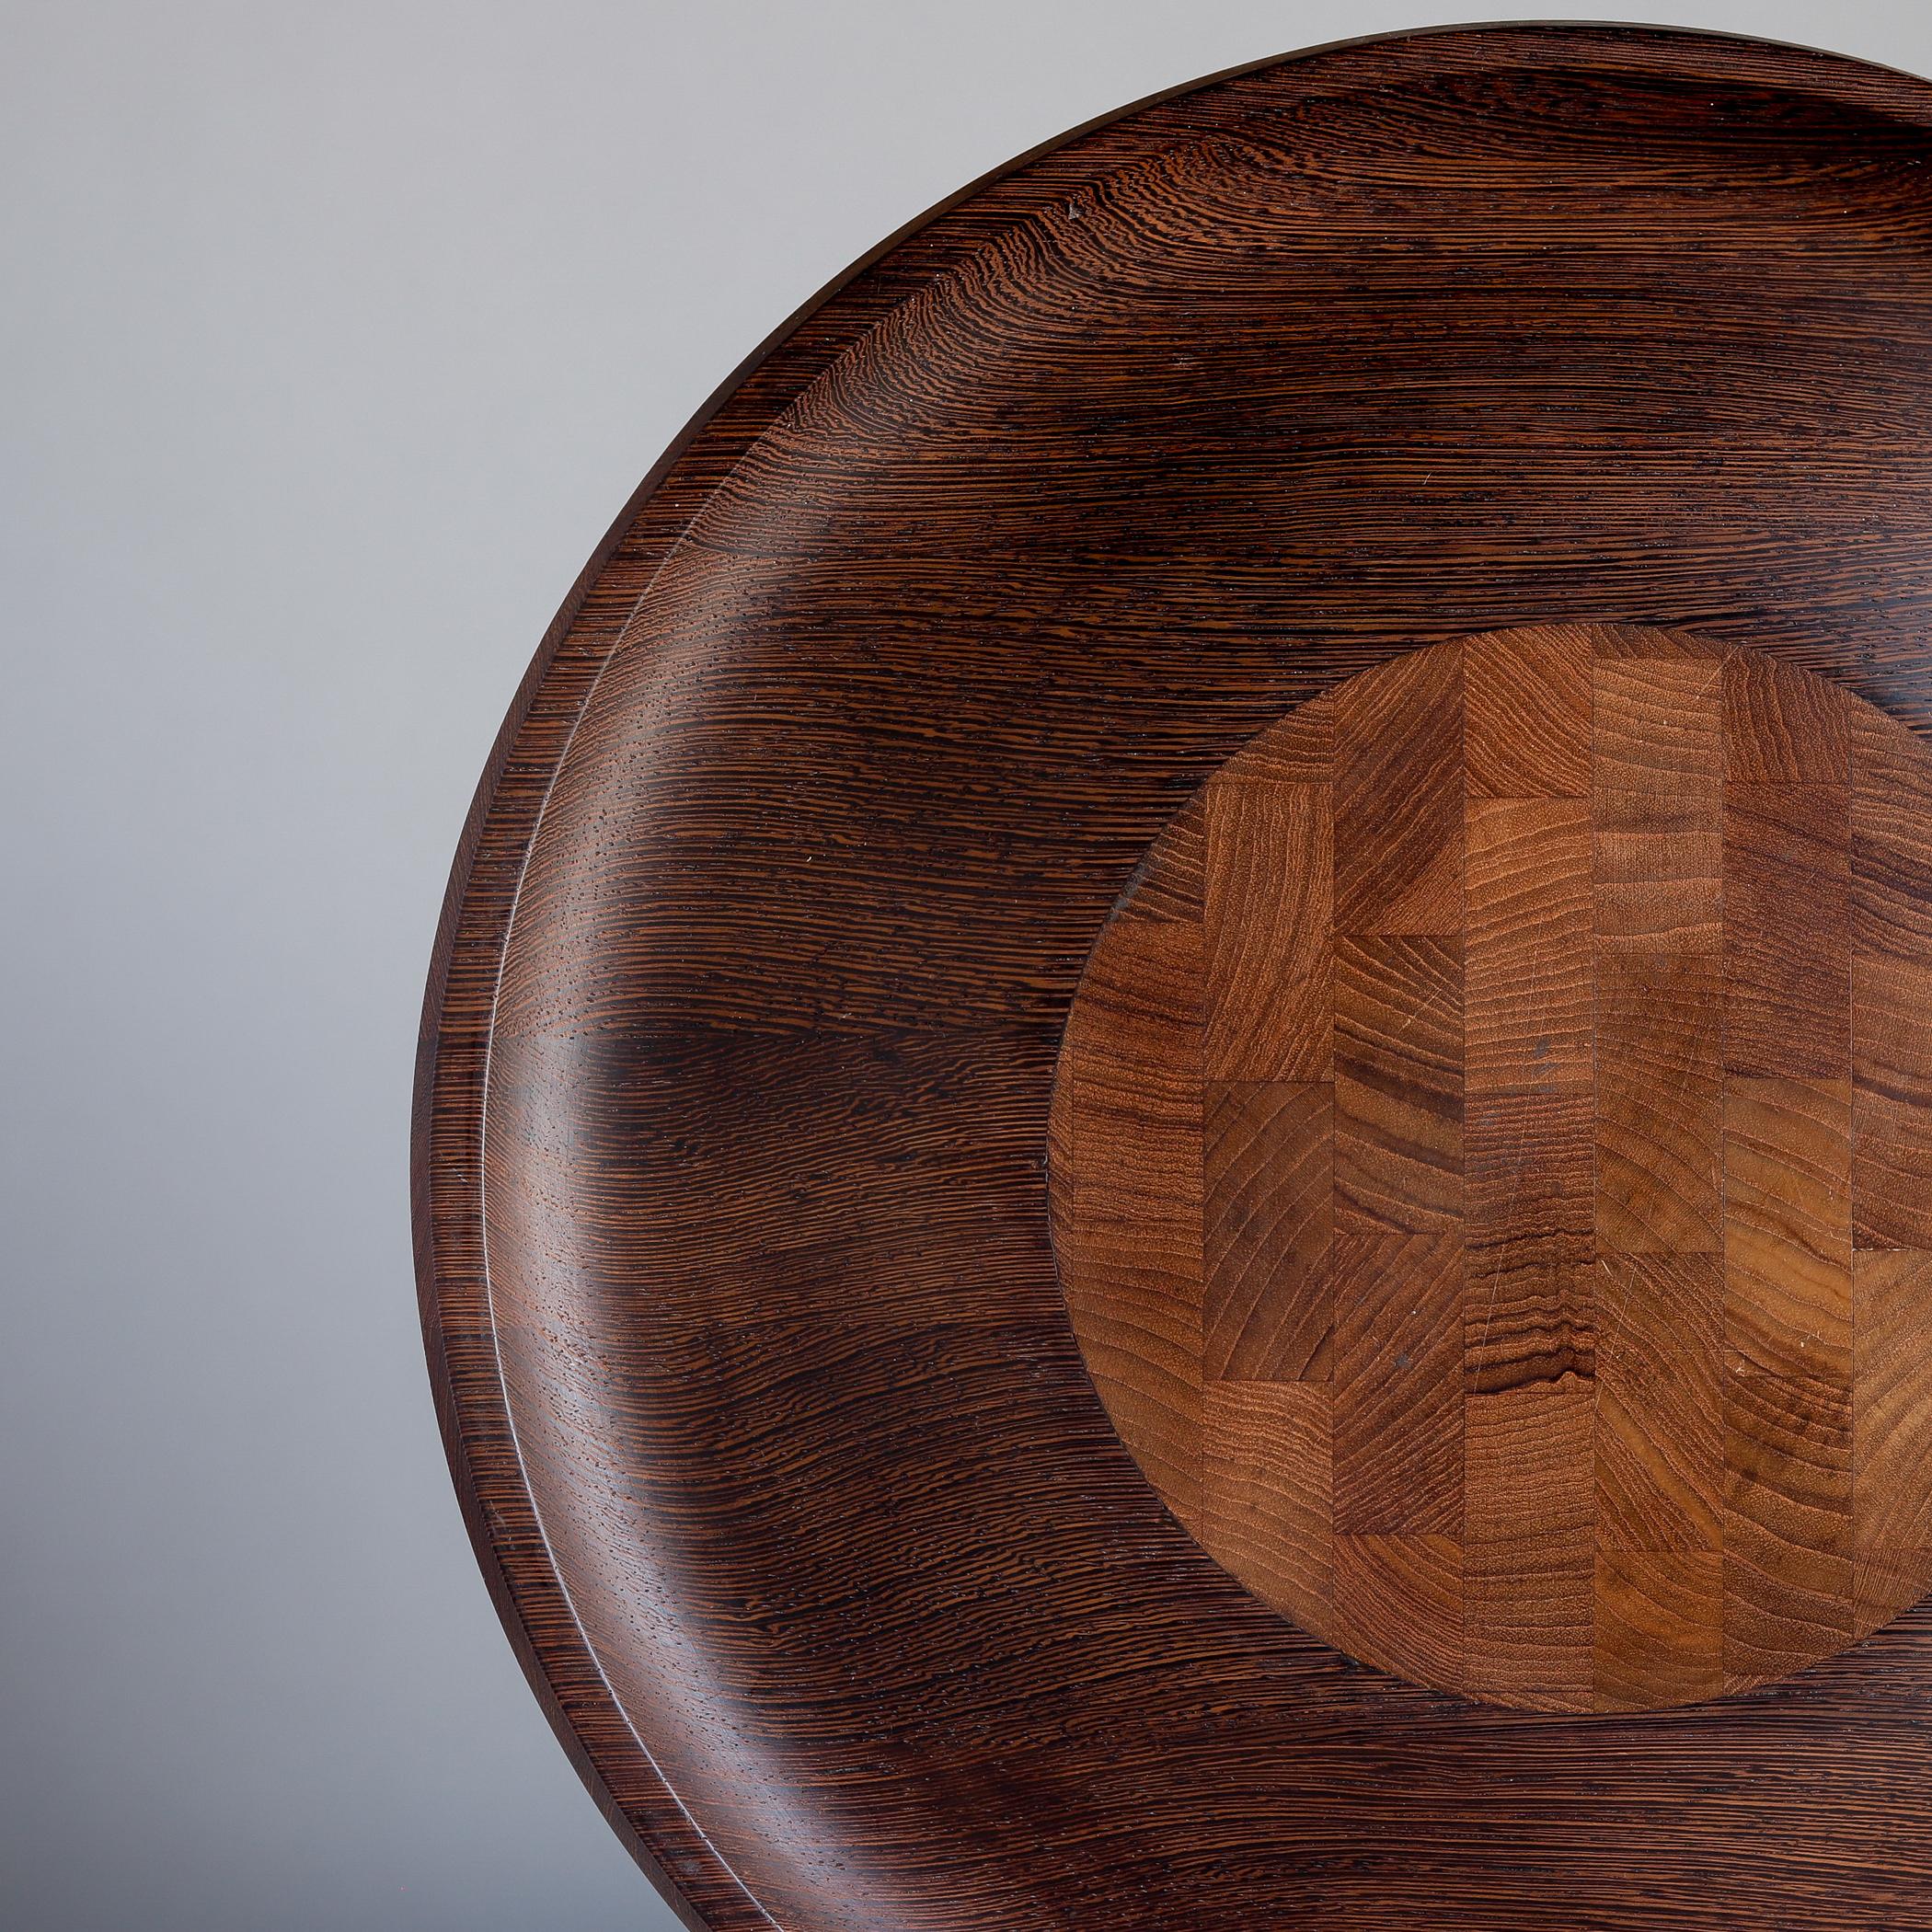 Large circular cutting board and serving tray designed by Jens Quistgaard for Dansk, made in wenge (an African hardwood) for the Rare Woods line produced in the early 1960s, model 1602. The staved end-grain center section (end-grain is hard, durable